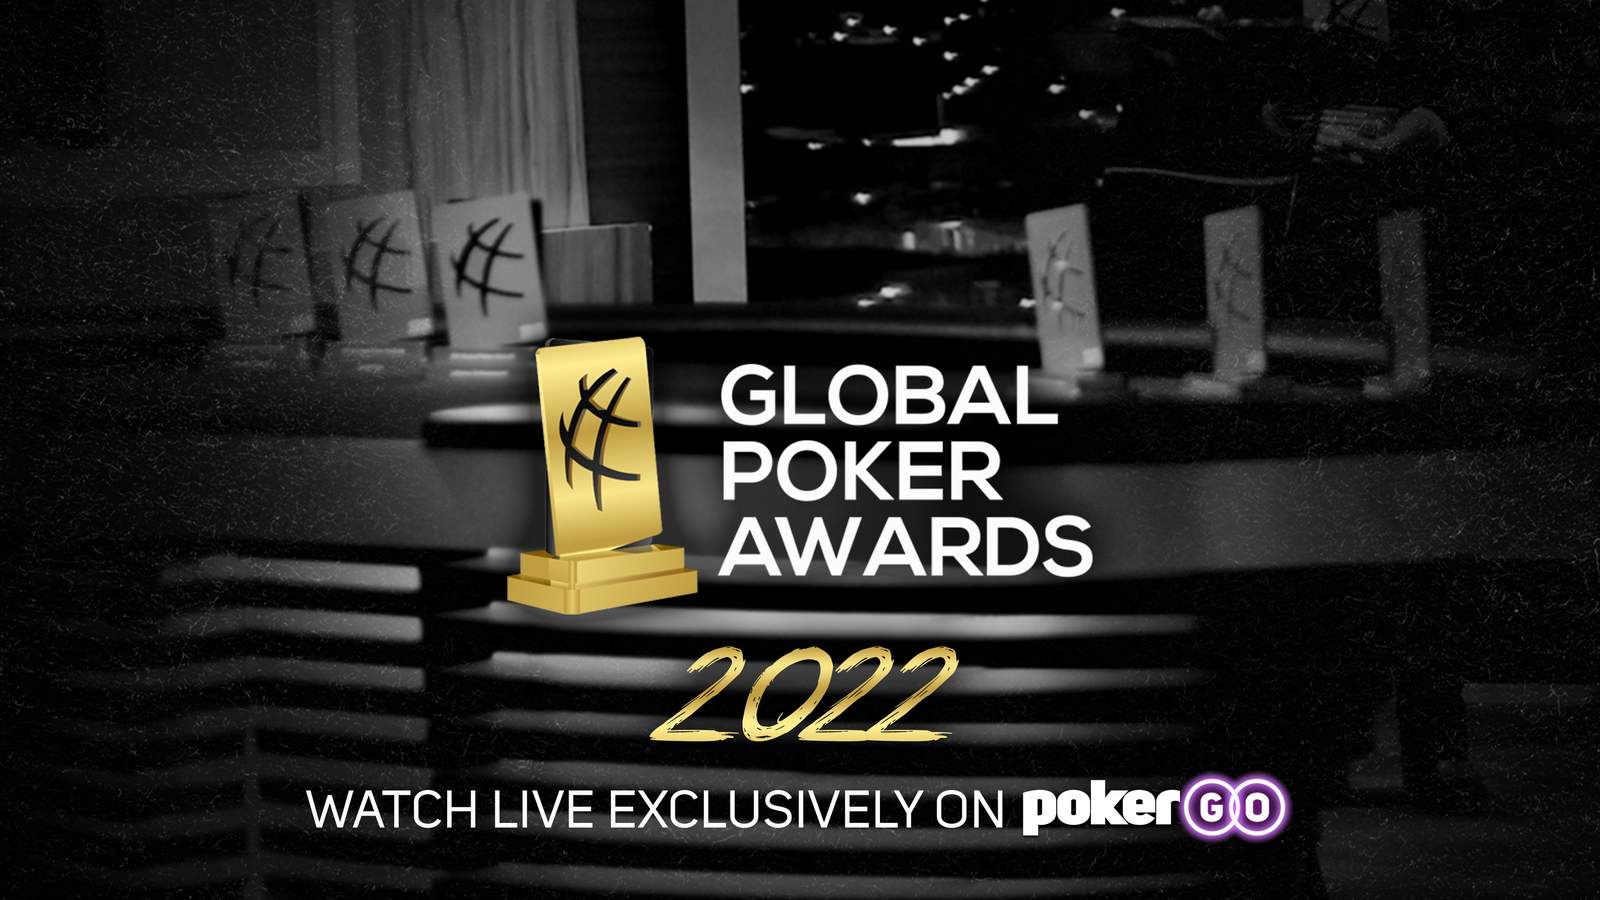 Watch the Global Poker Awards on PokerGO at 8:30 p.m. ET Tonight